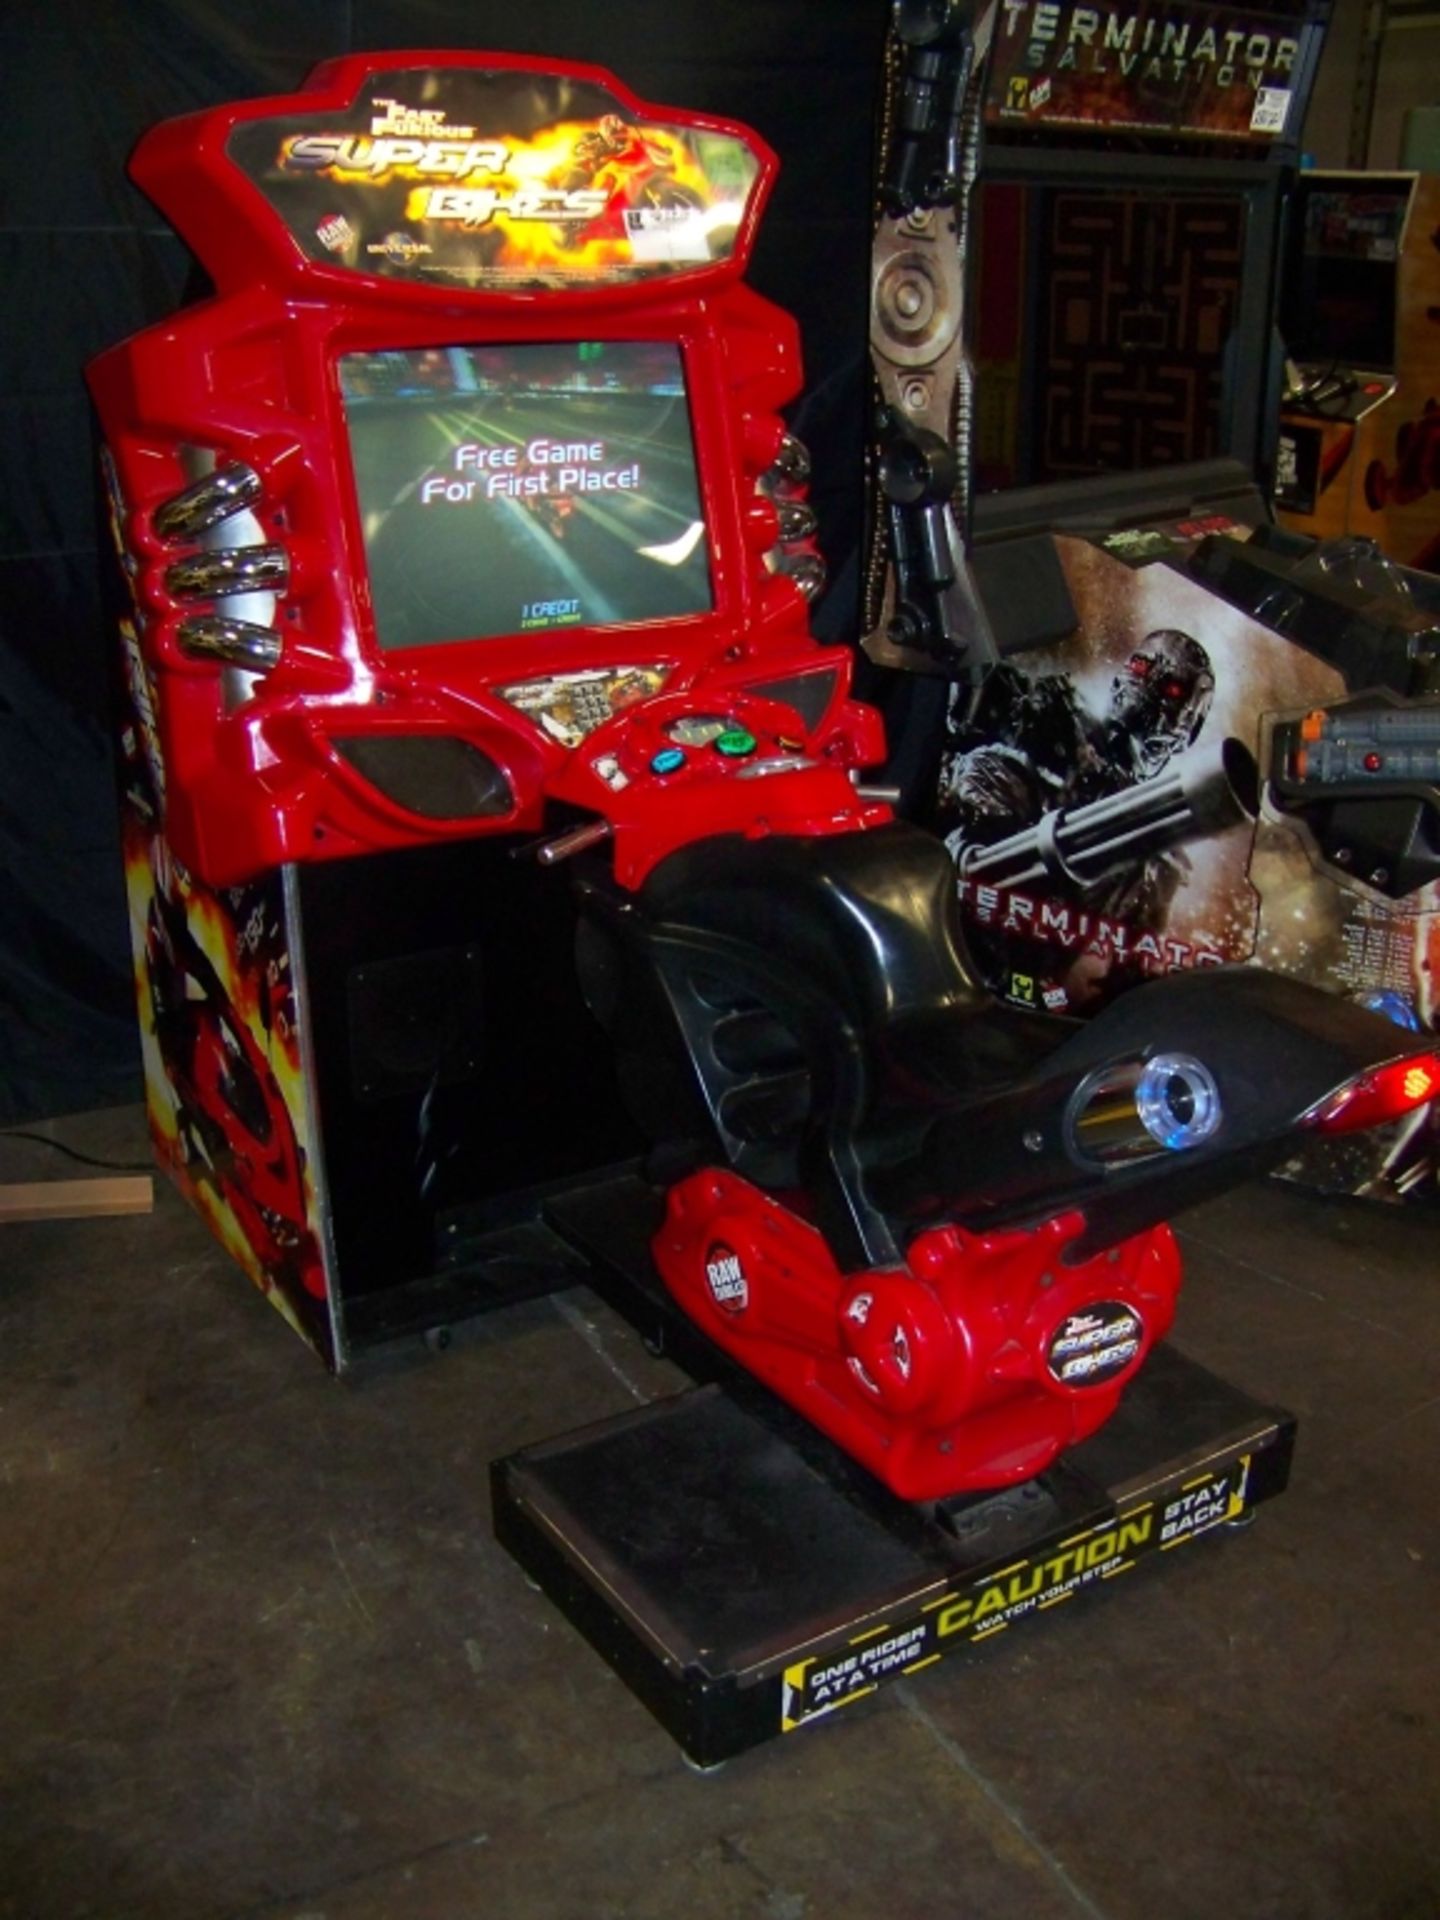 SUPER BIKES FAST & FURIOUS RACING ARCADE GAME Item is in used condition. Evidence of wear and - Image 9 of 9